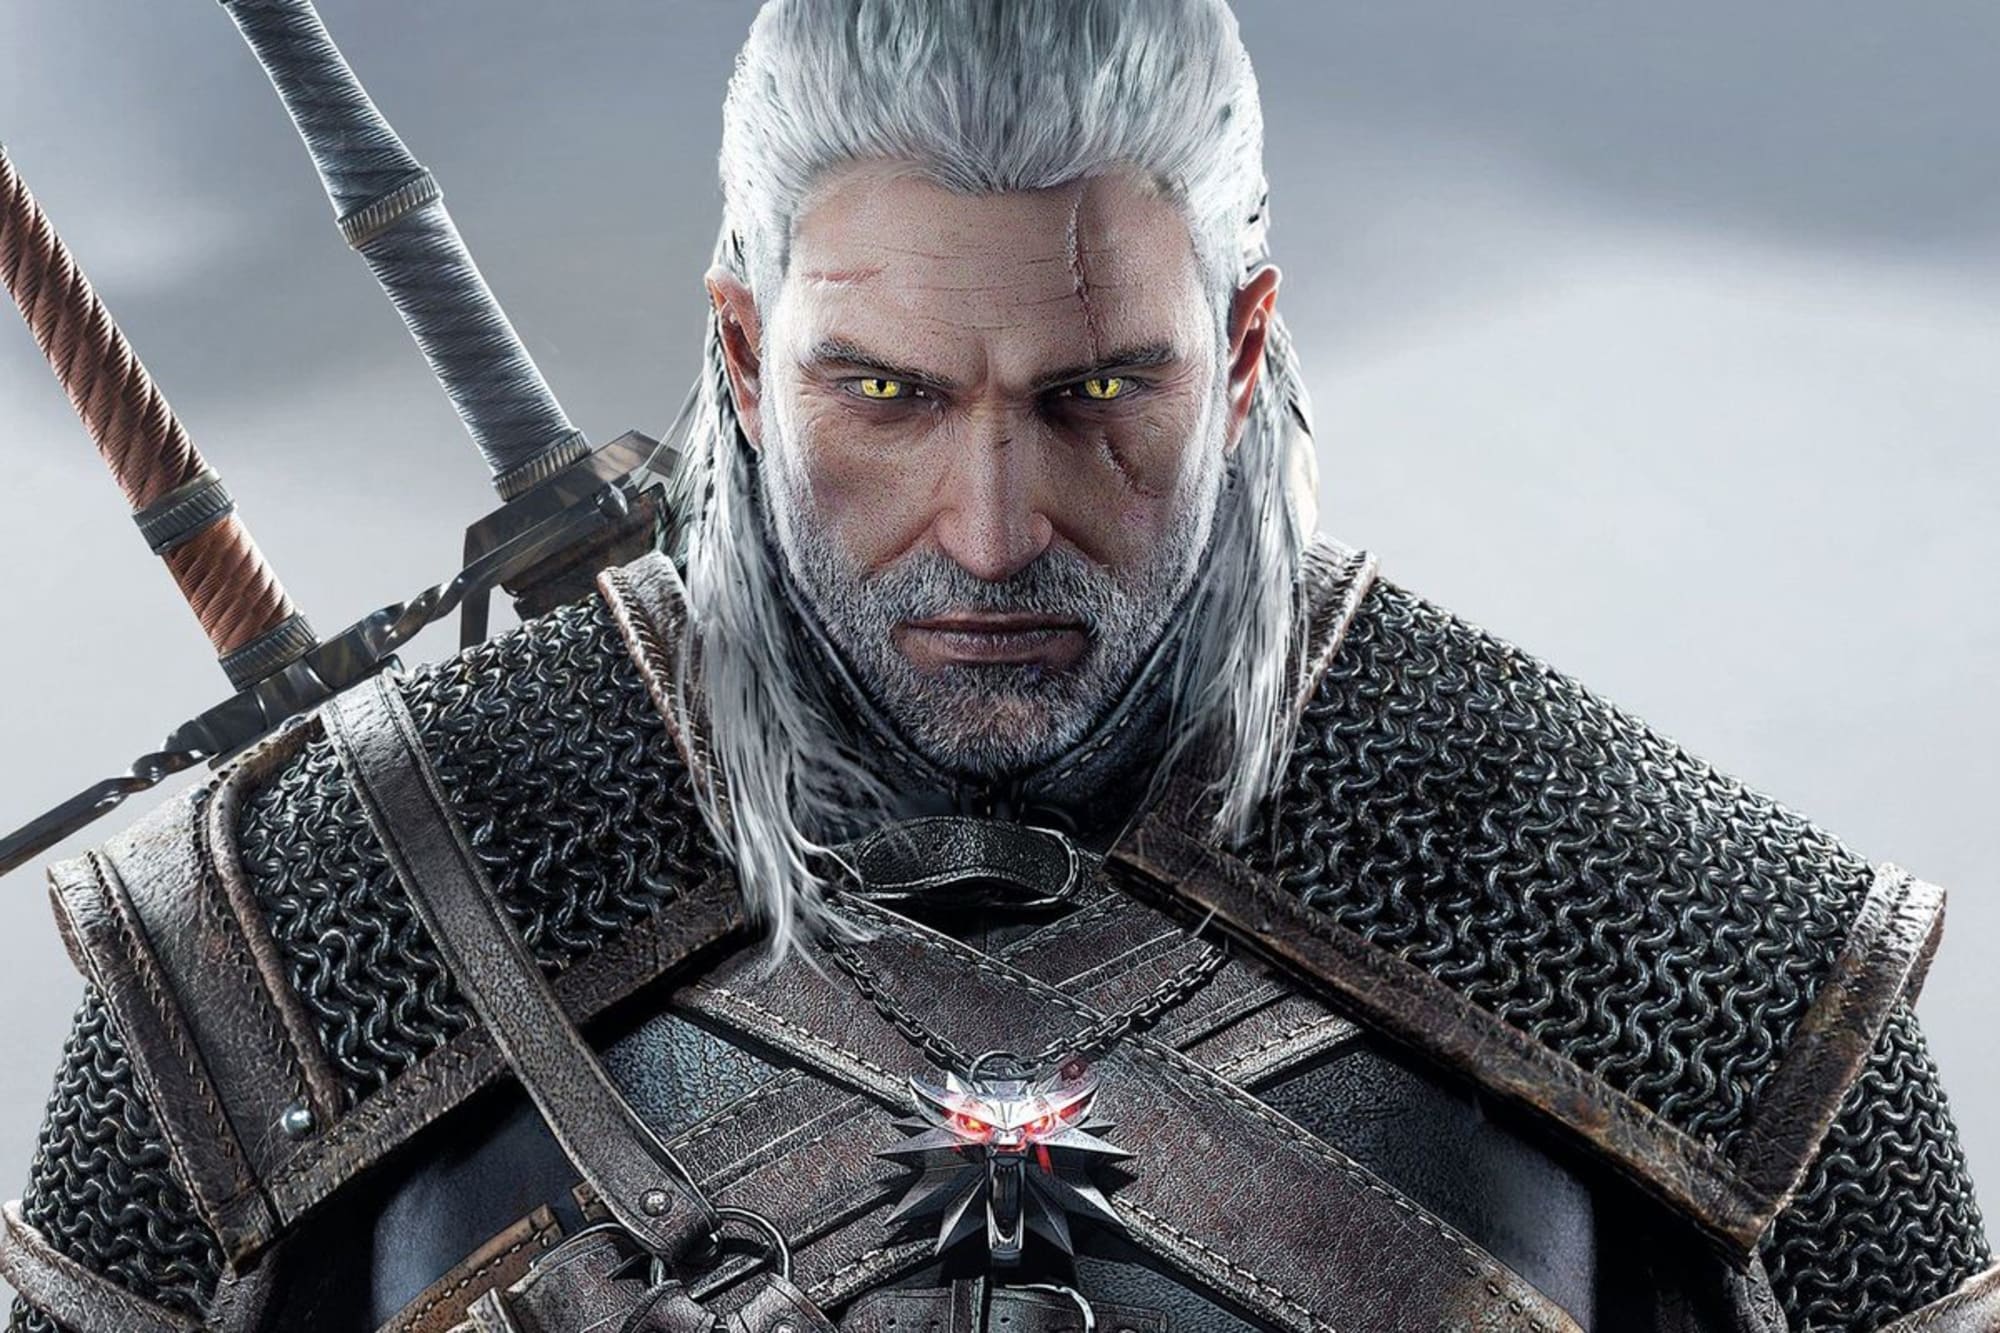 The Witcher' Season 4 Will Feature a Very Different Geralt of Rivia